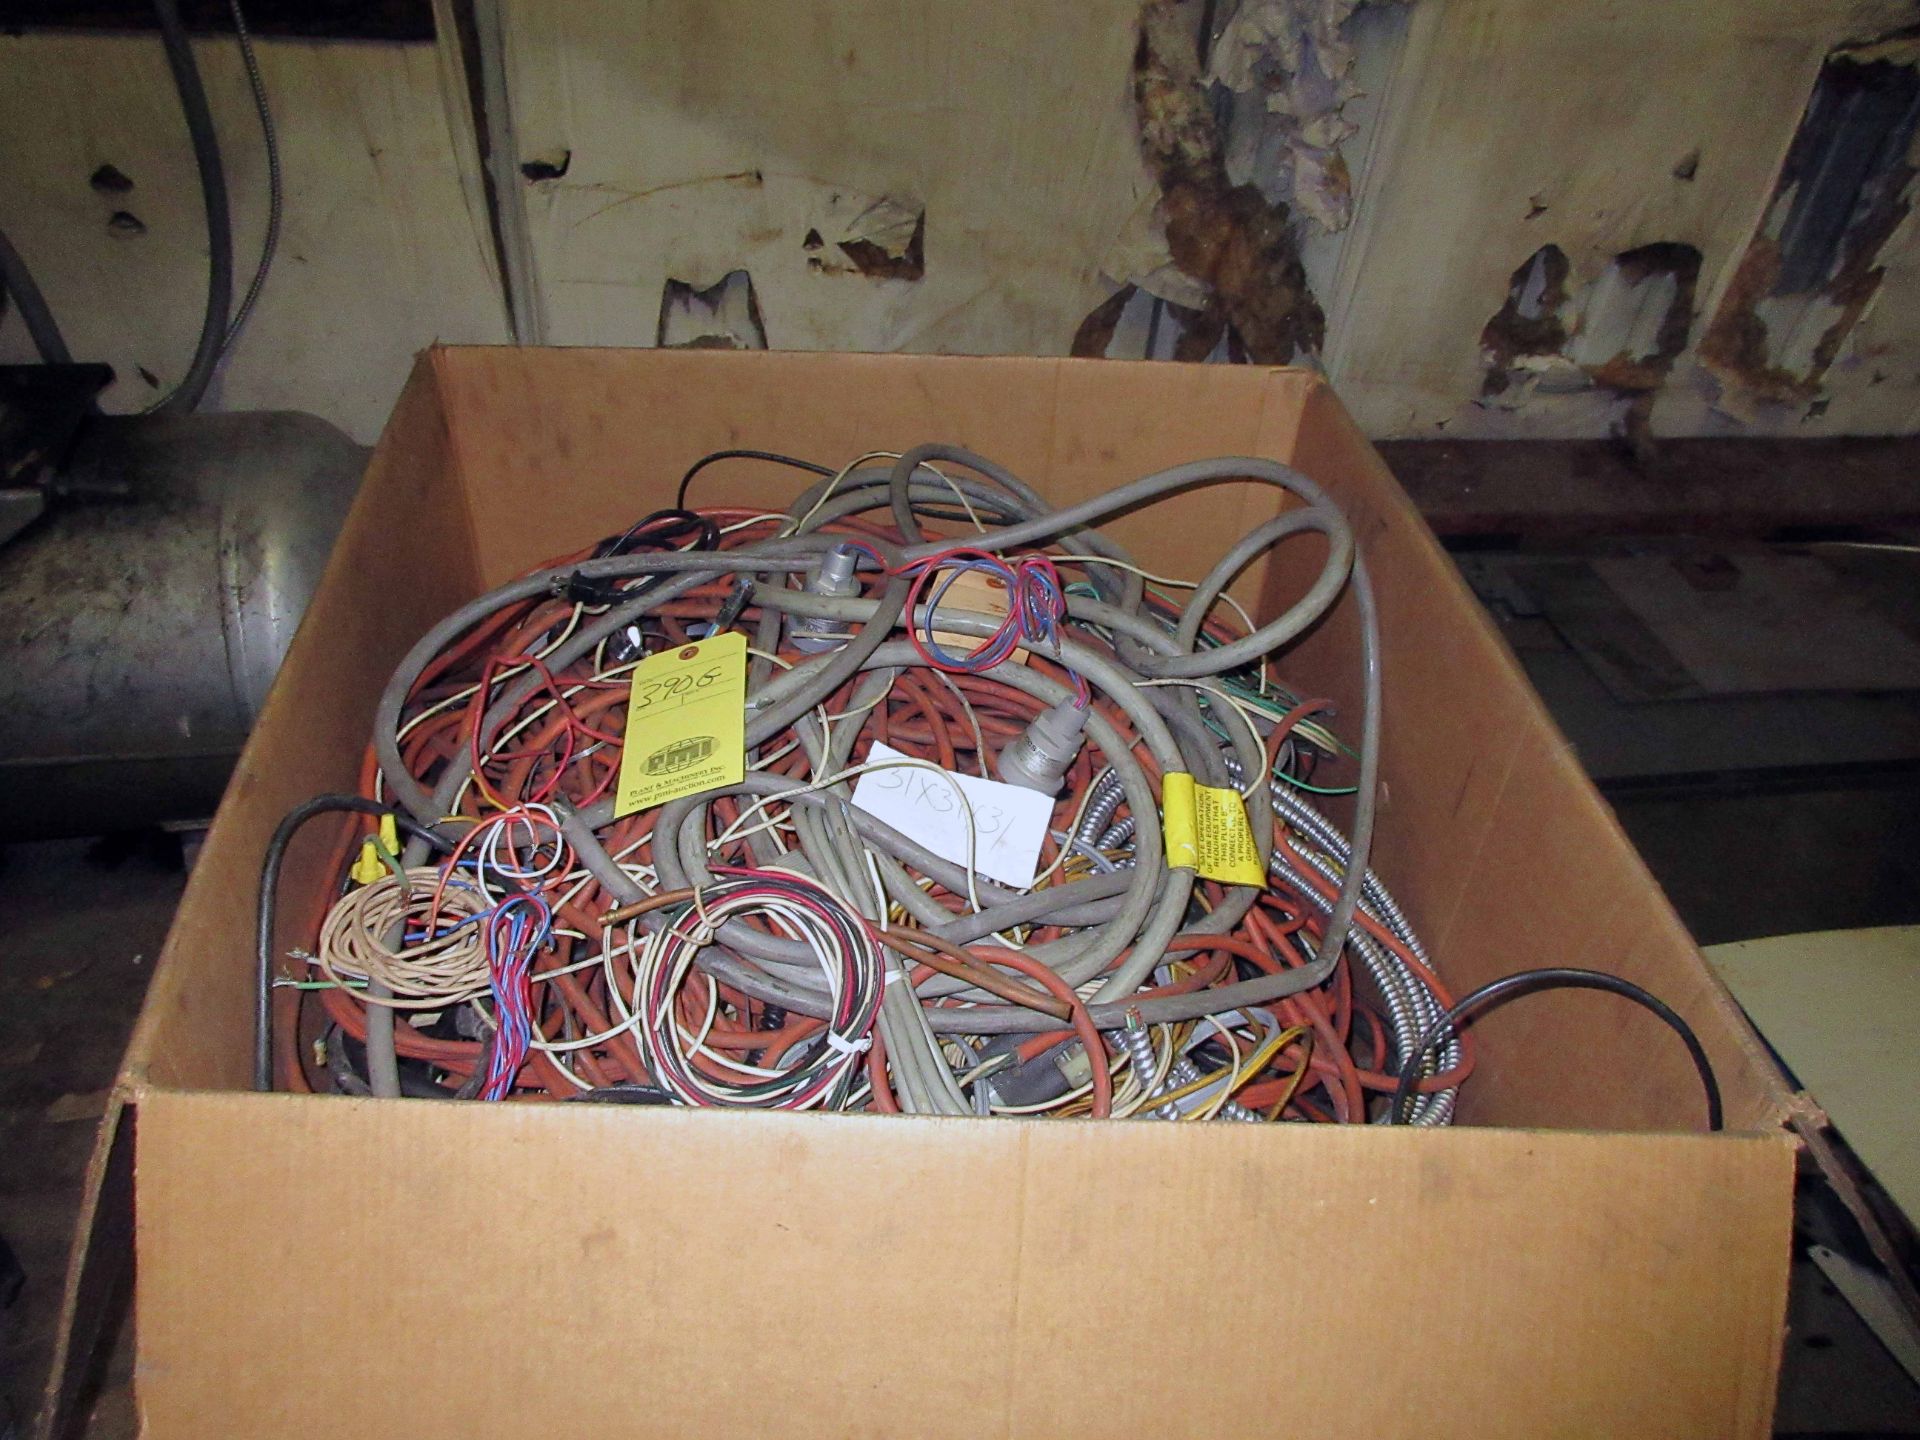 LOT CONSISTING OF: electrical cable & cords, in 41" x 41" box